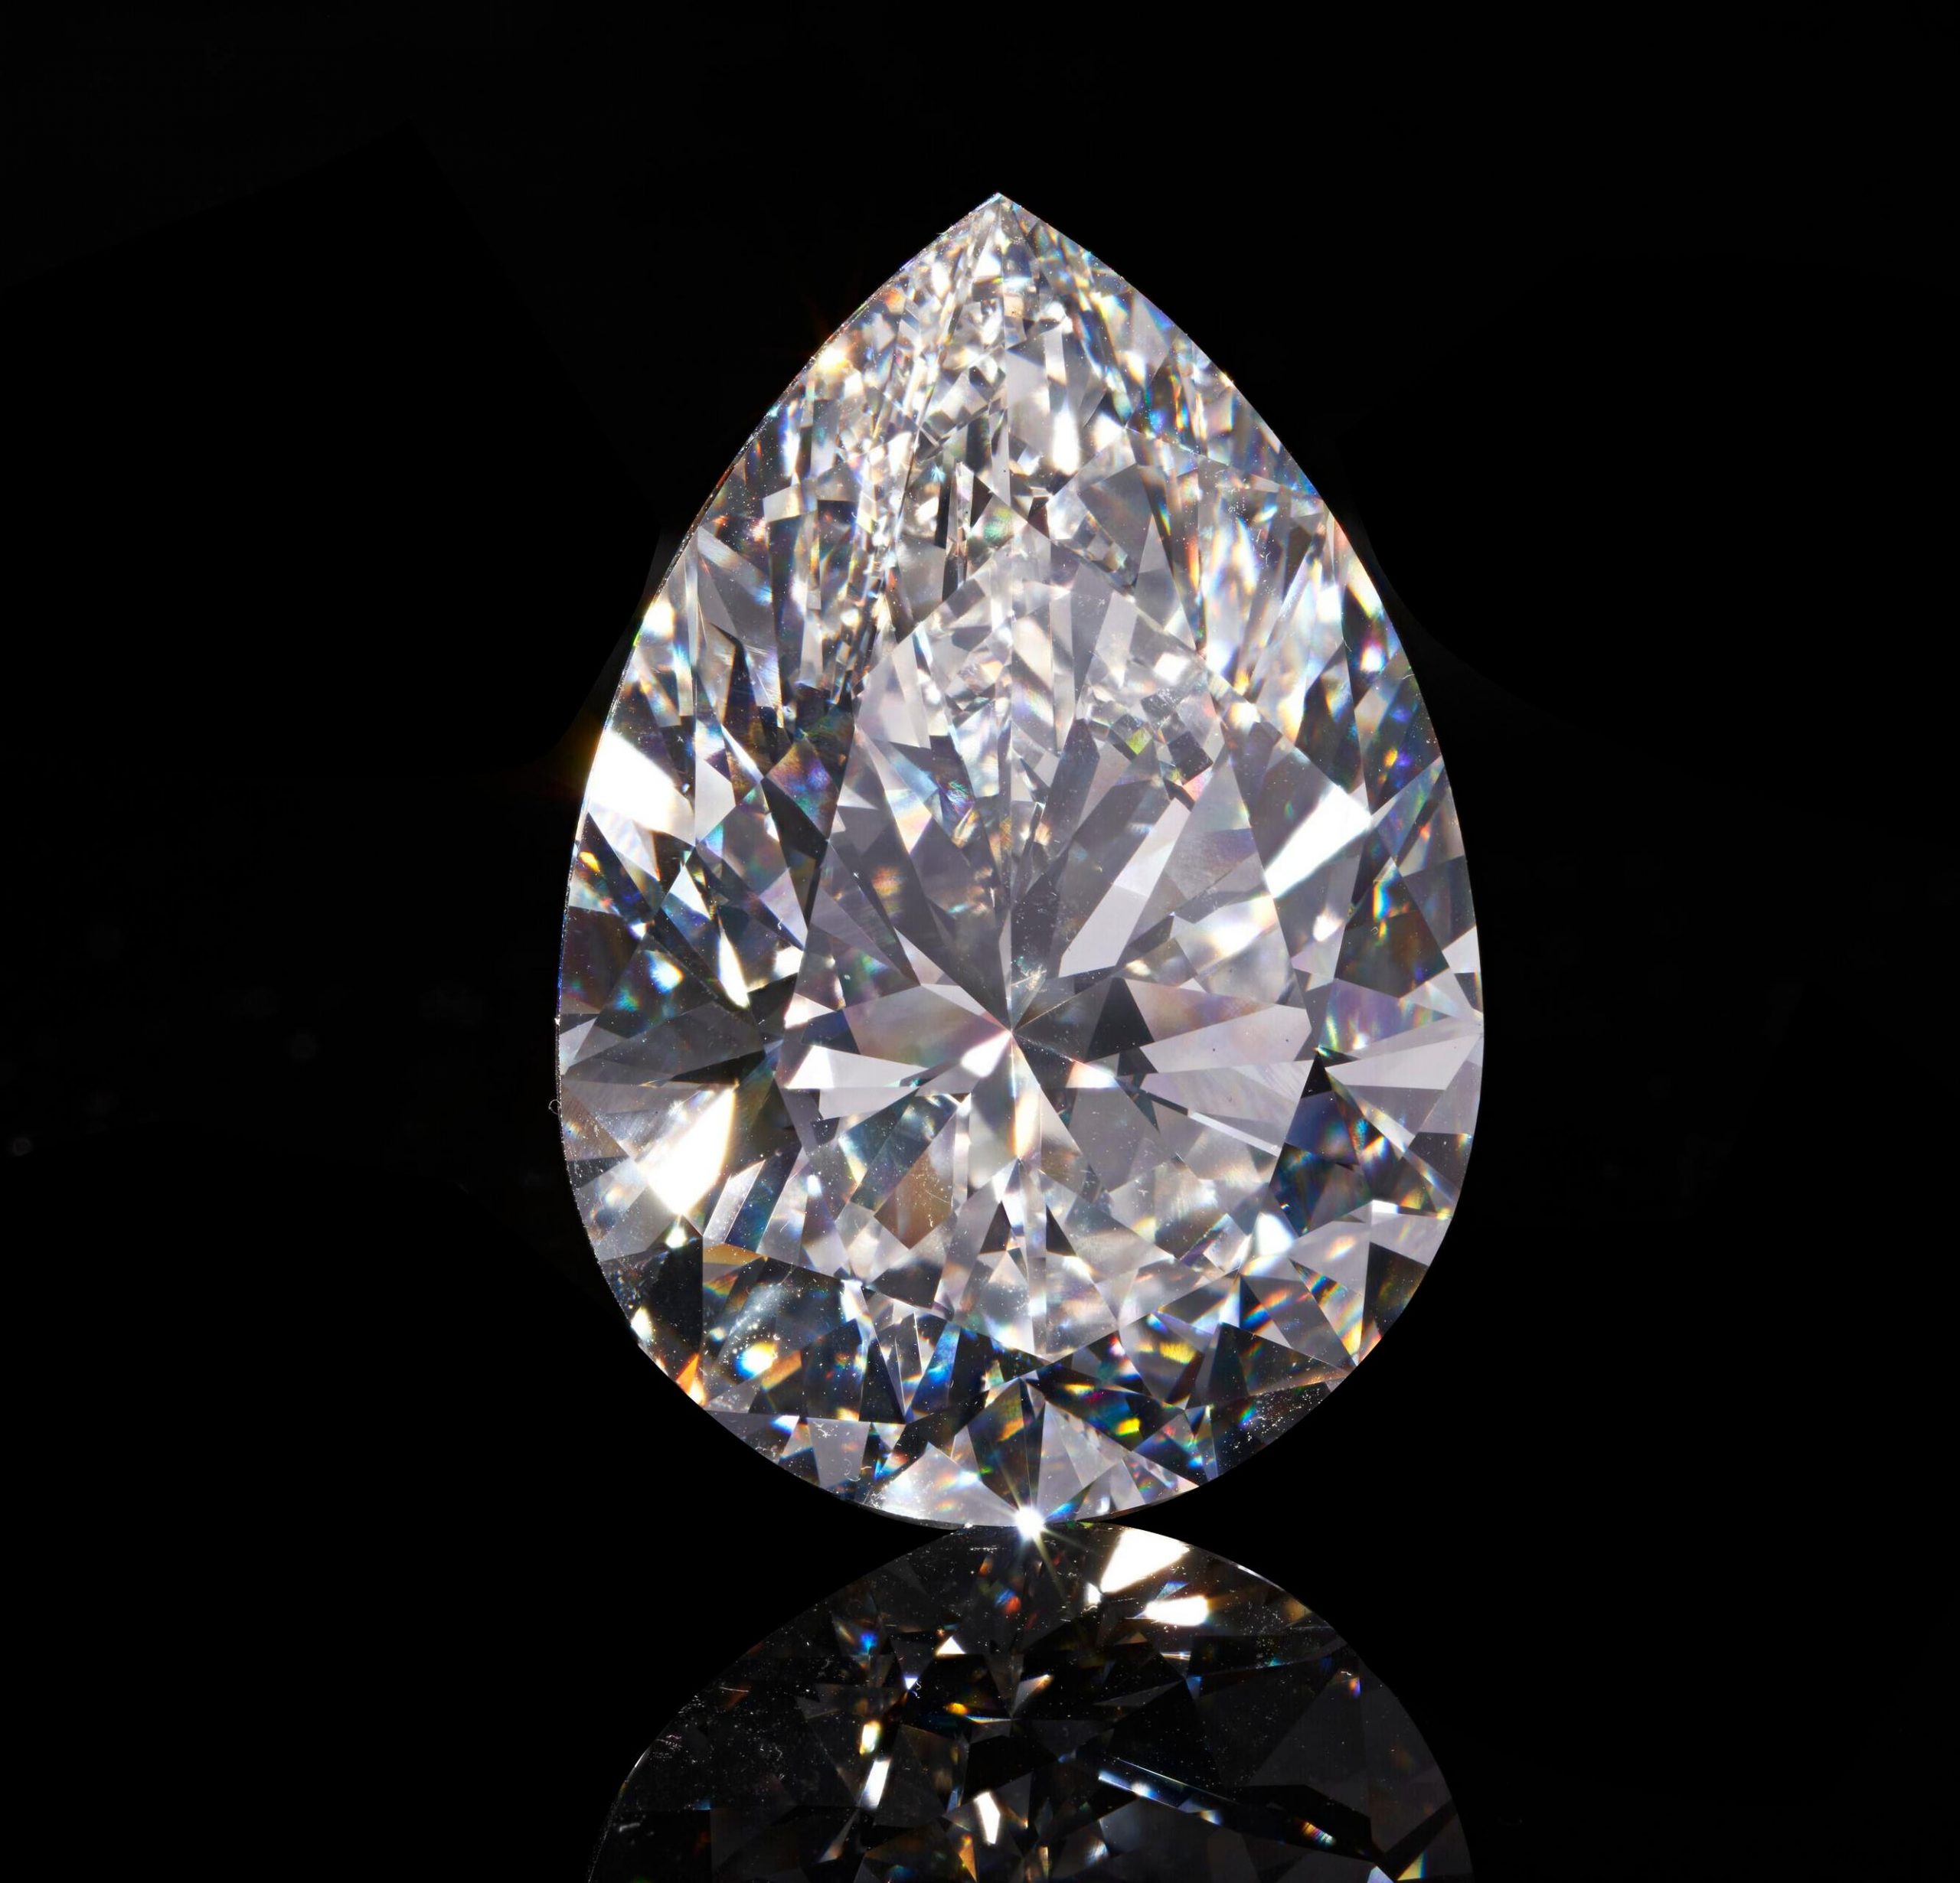 This White Diamond Is The Largest To Ever Appear At Auction